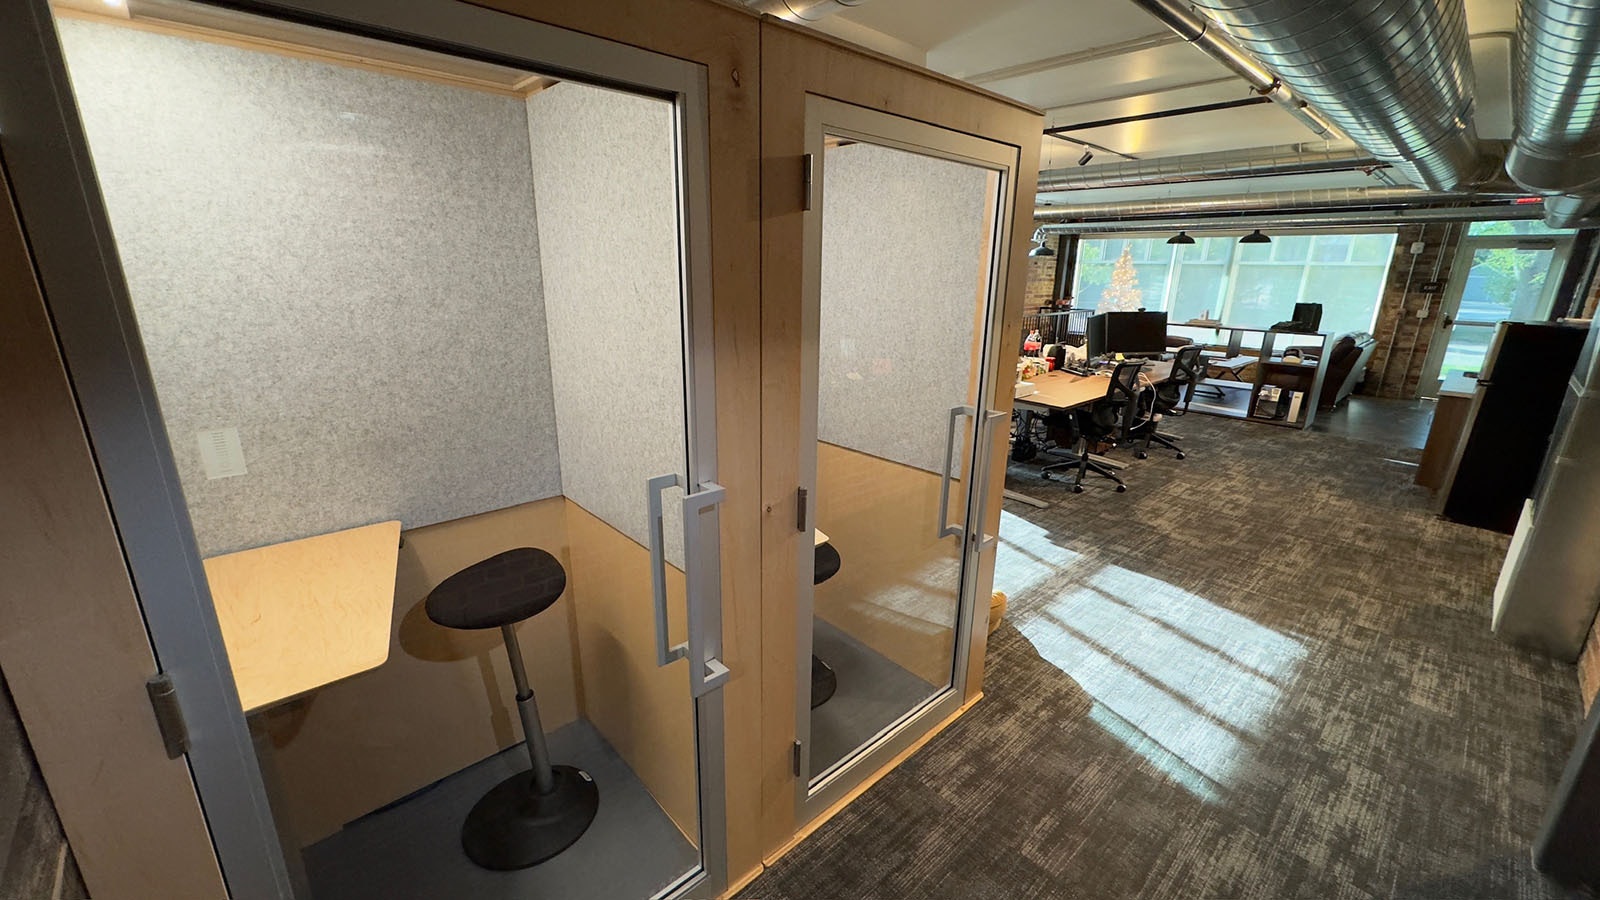 Right off the newsroom are a pair of sound-dampening cubbyholes dubbed the "phone booths" where reporters can go to conduct interviews or get a little more privacy than the open newsroom.